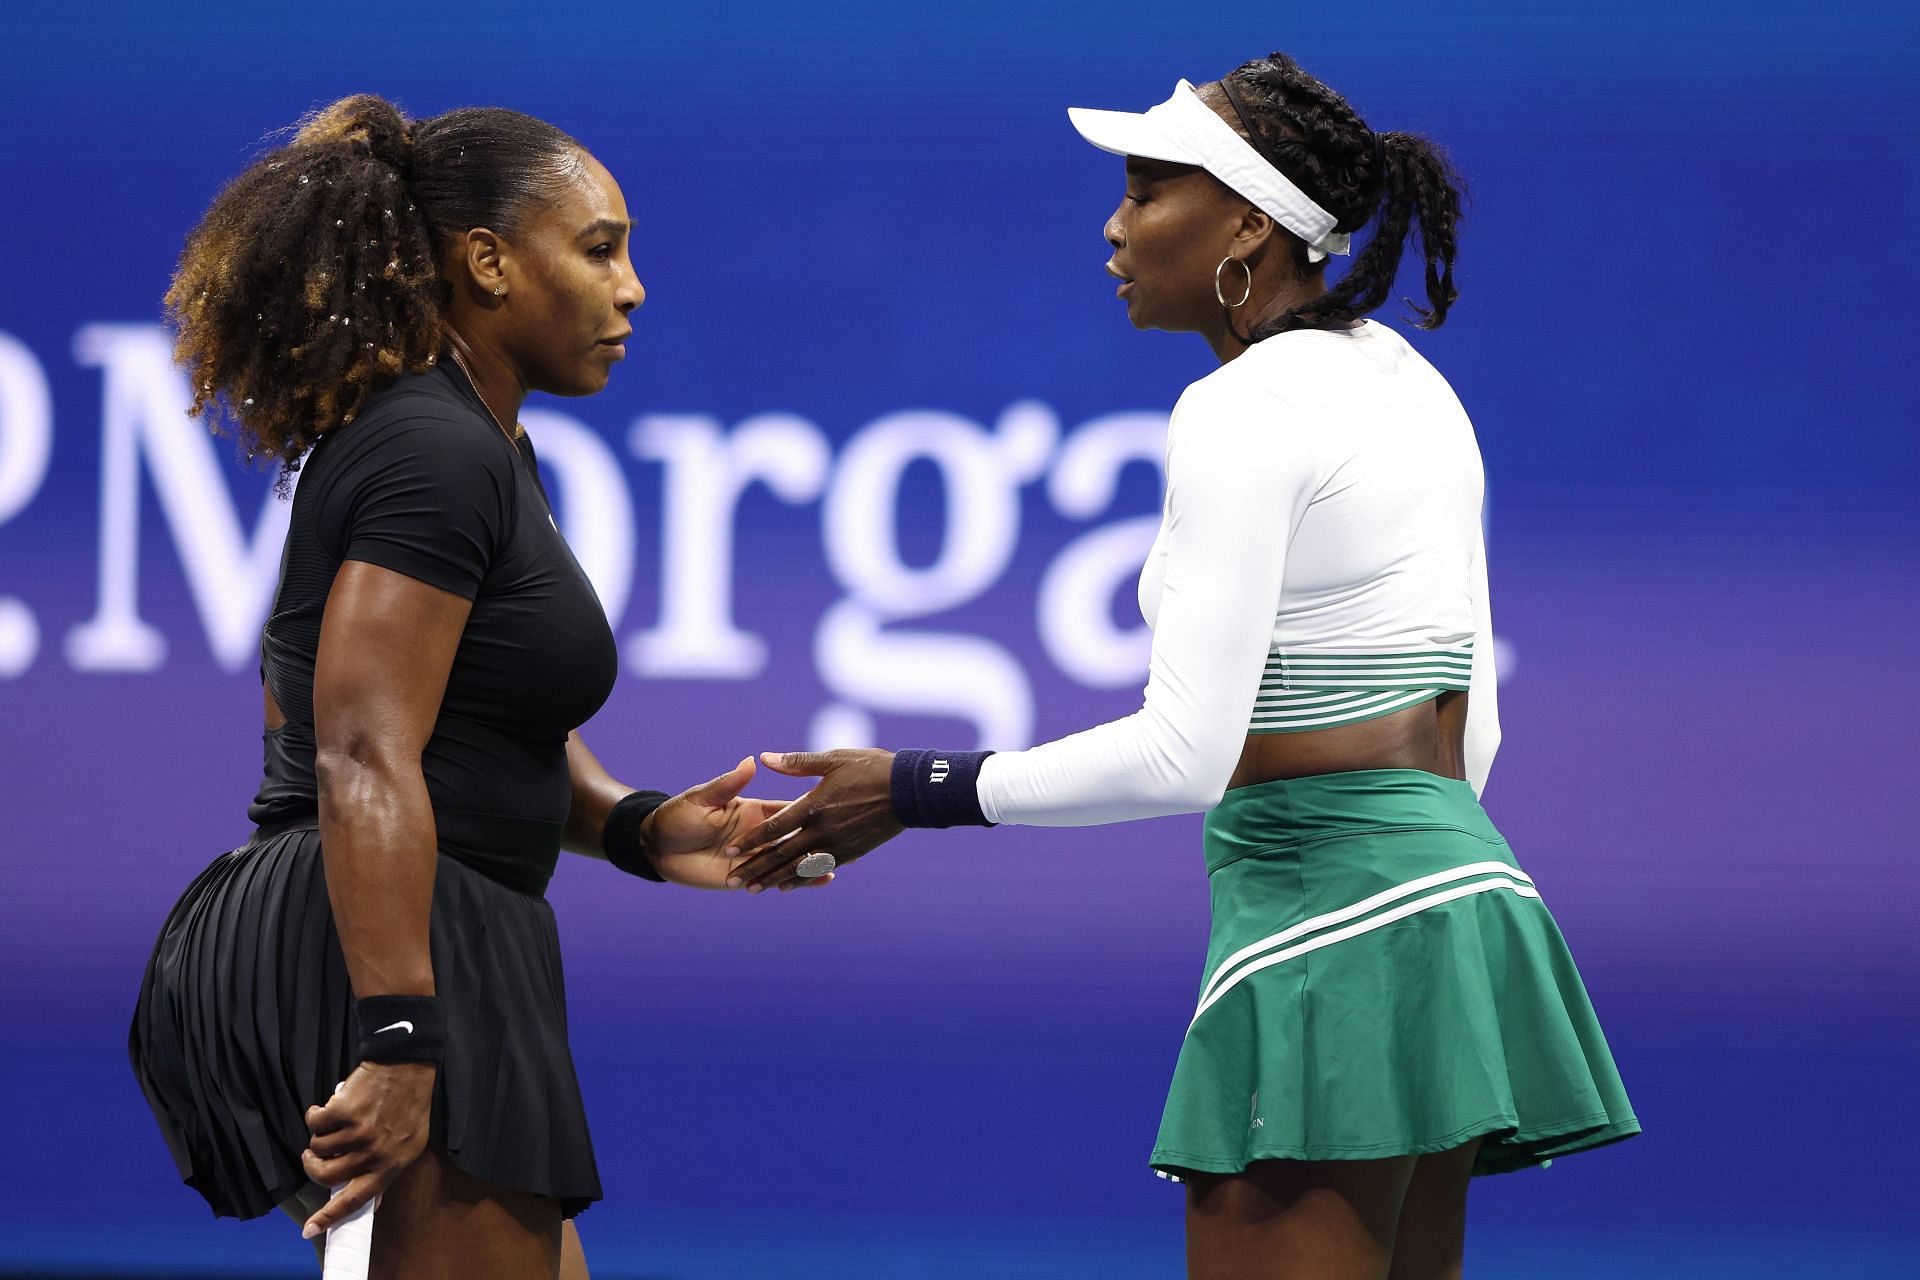 Venus and Serena Williams at the 2022 US Open - Day 4